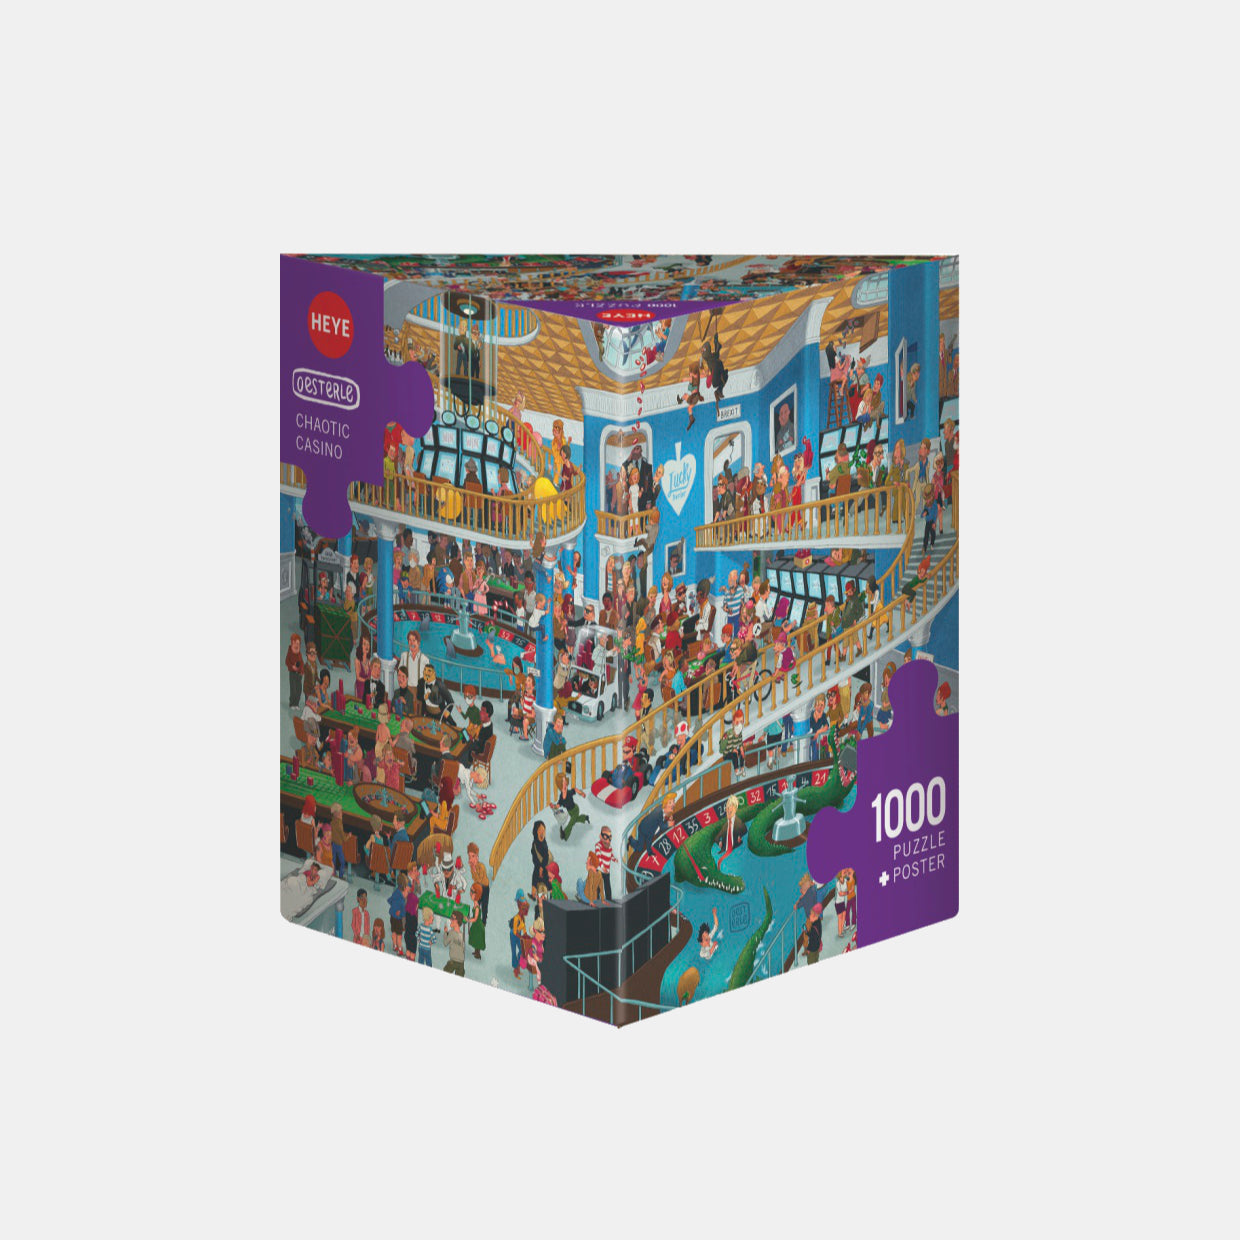 Oesterle Chaotic Casino - 1000 pieces puzzle